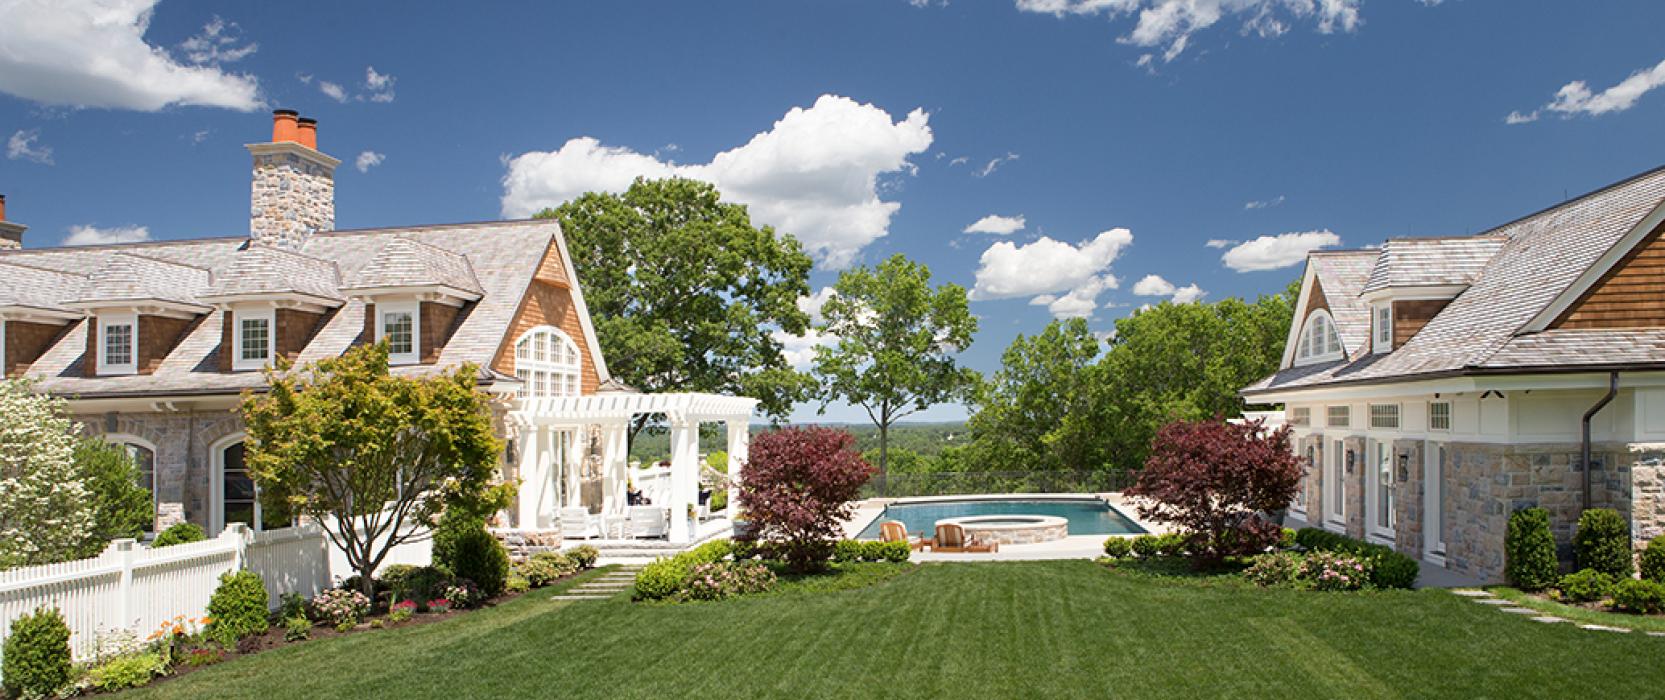 Watch a Stunning New England Mansion Project from Start to Finish